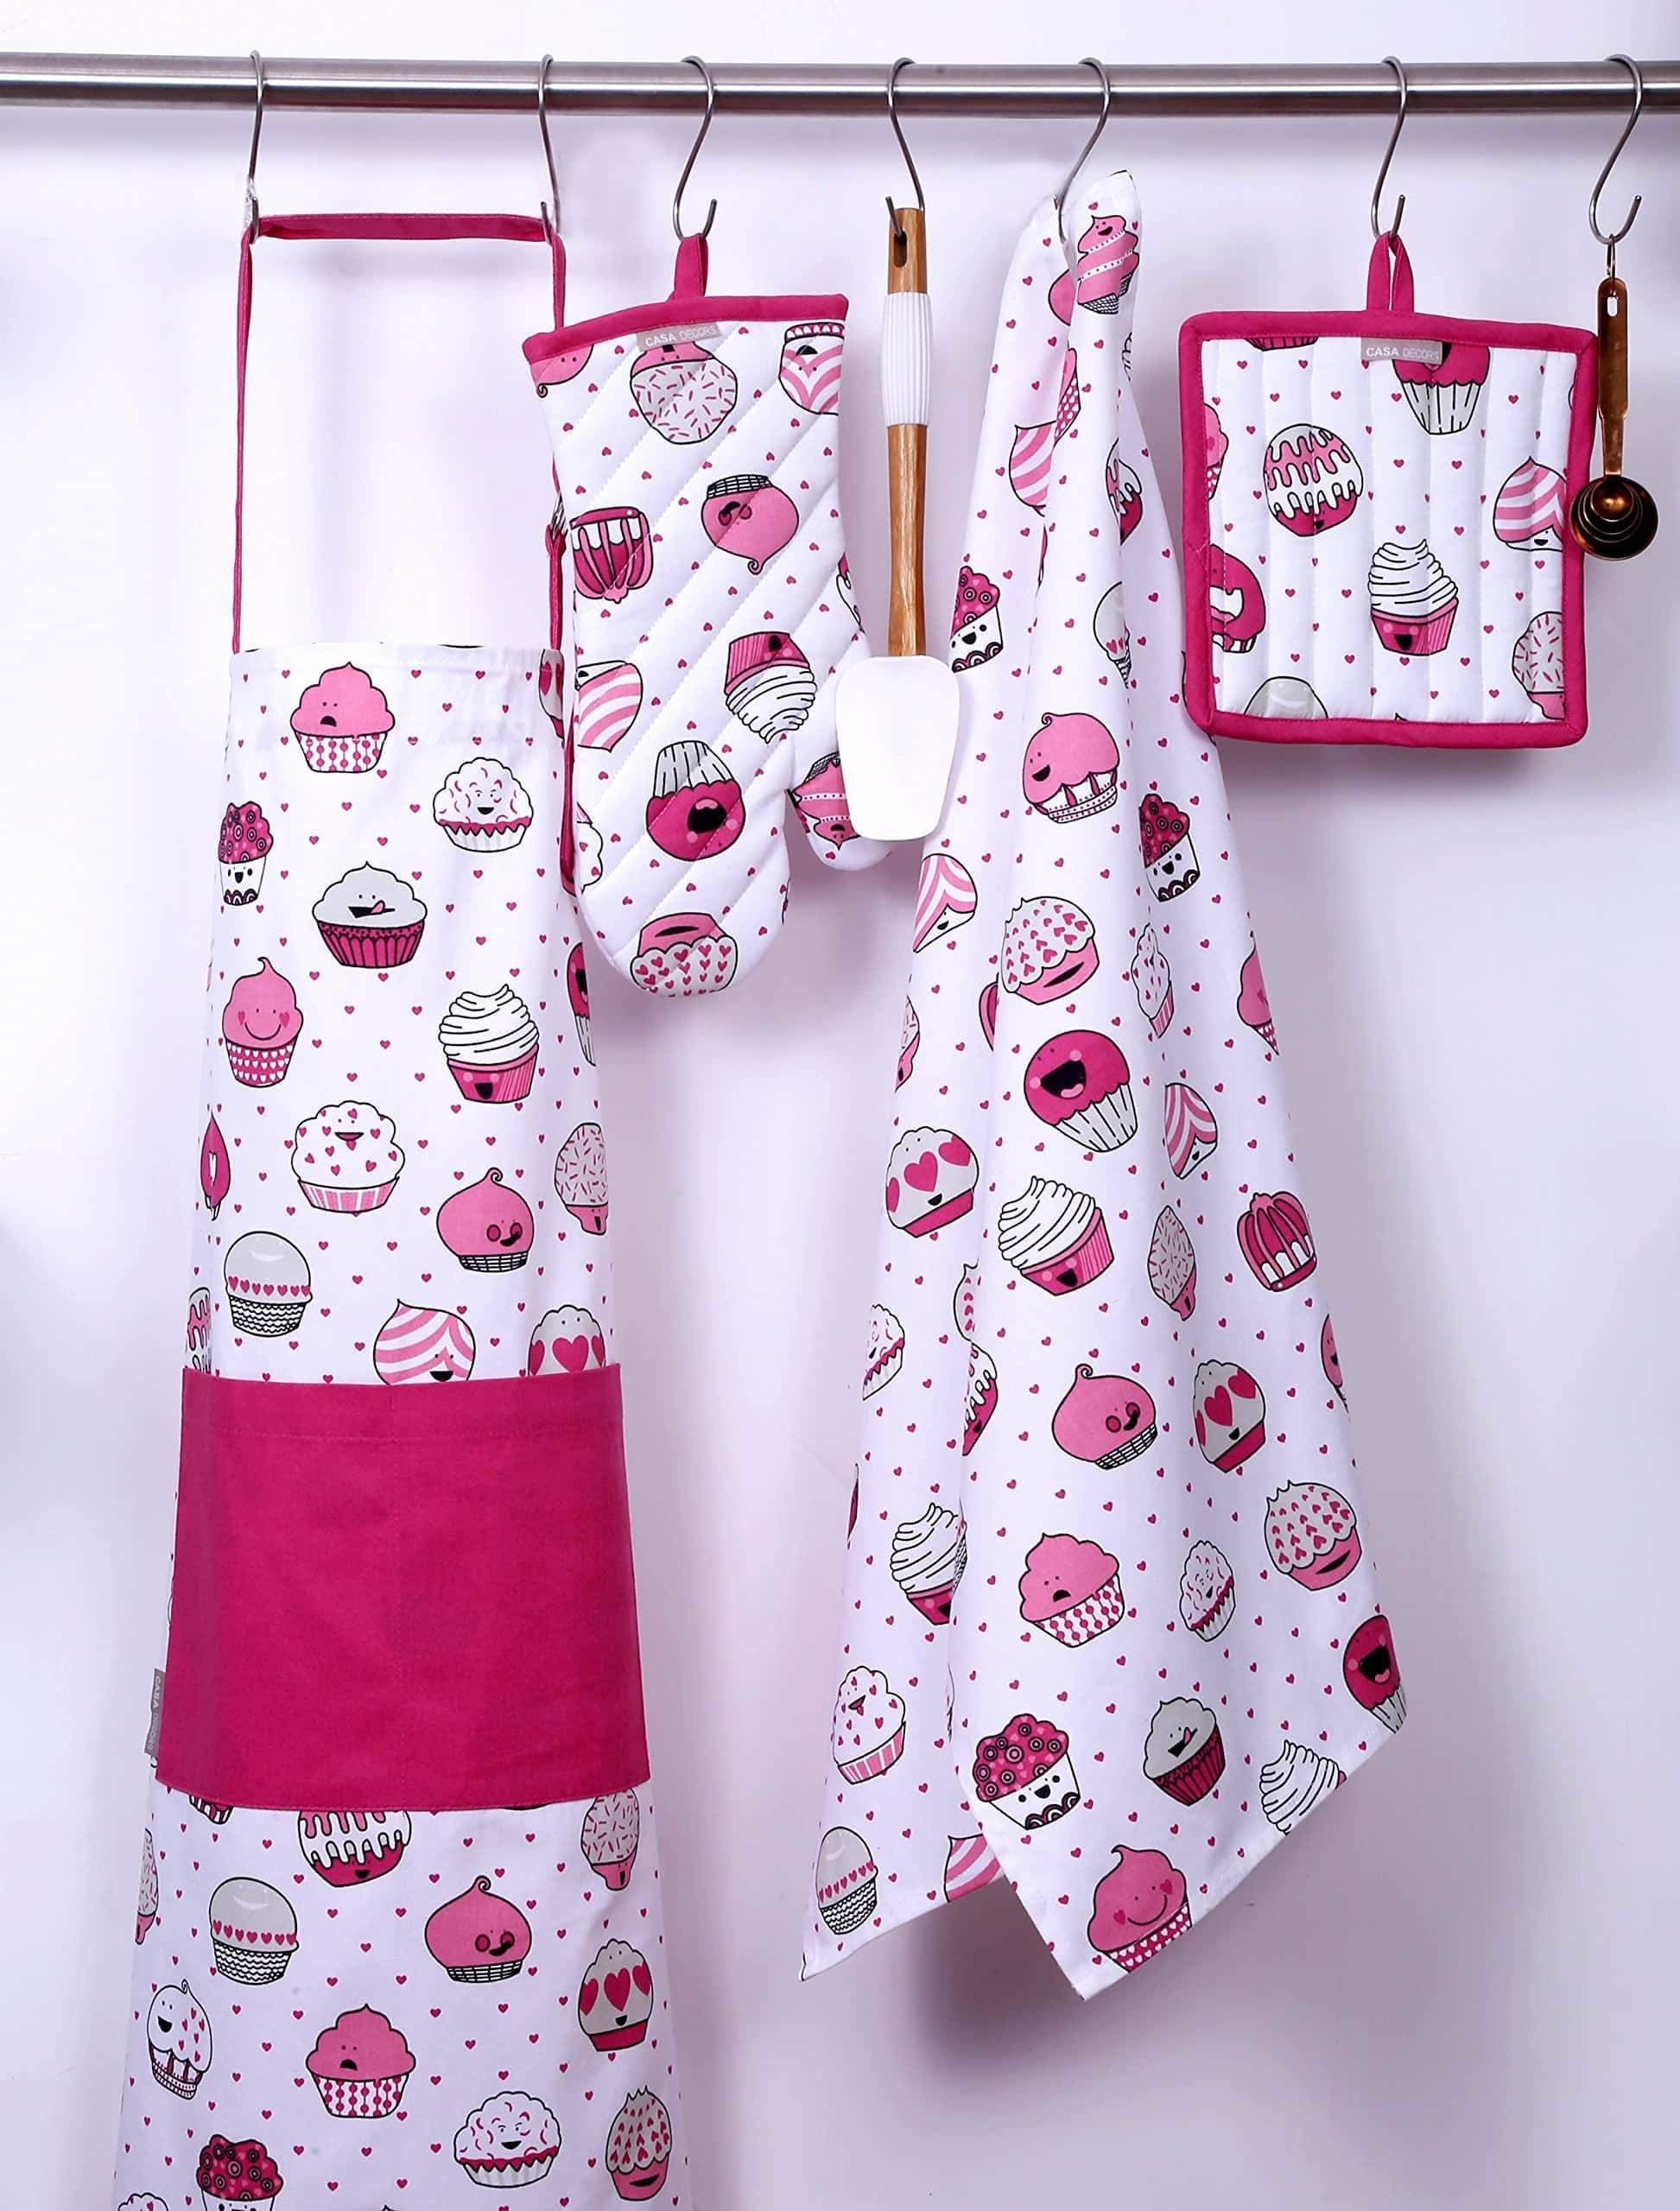 Related casa decors set of apron oven mitt pot holder pair of kitchen towels in a valentine cup cakes design made of 100 cotton eco friendly safe value pack and ideal gift set kitchen linen set